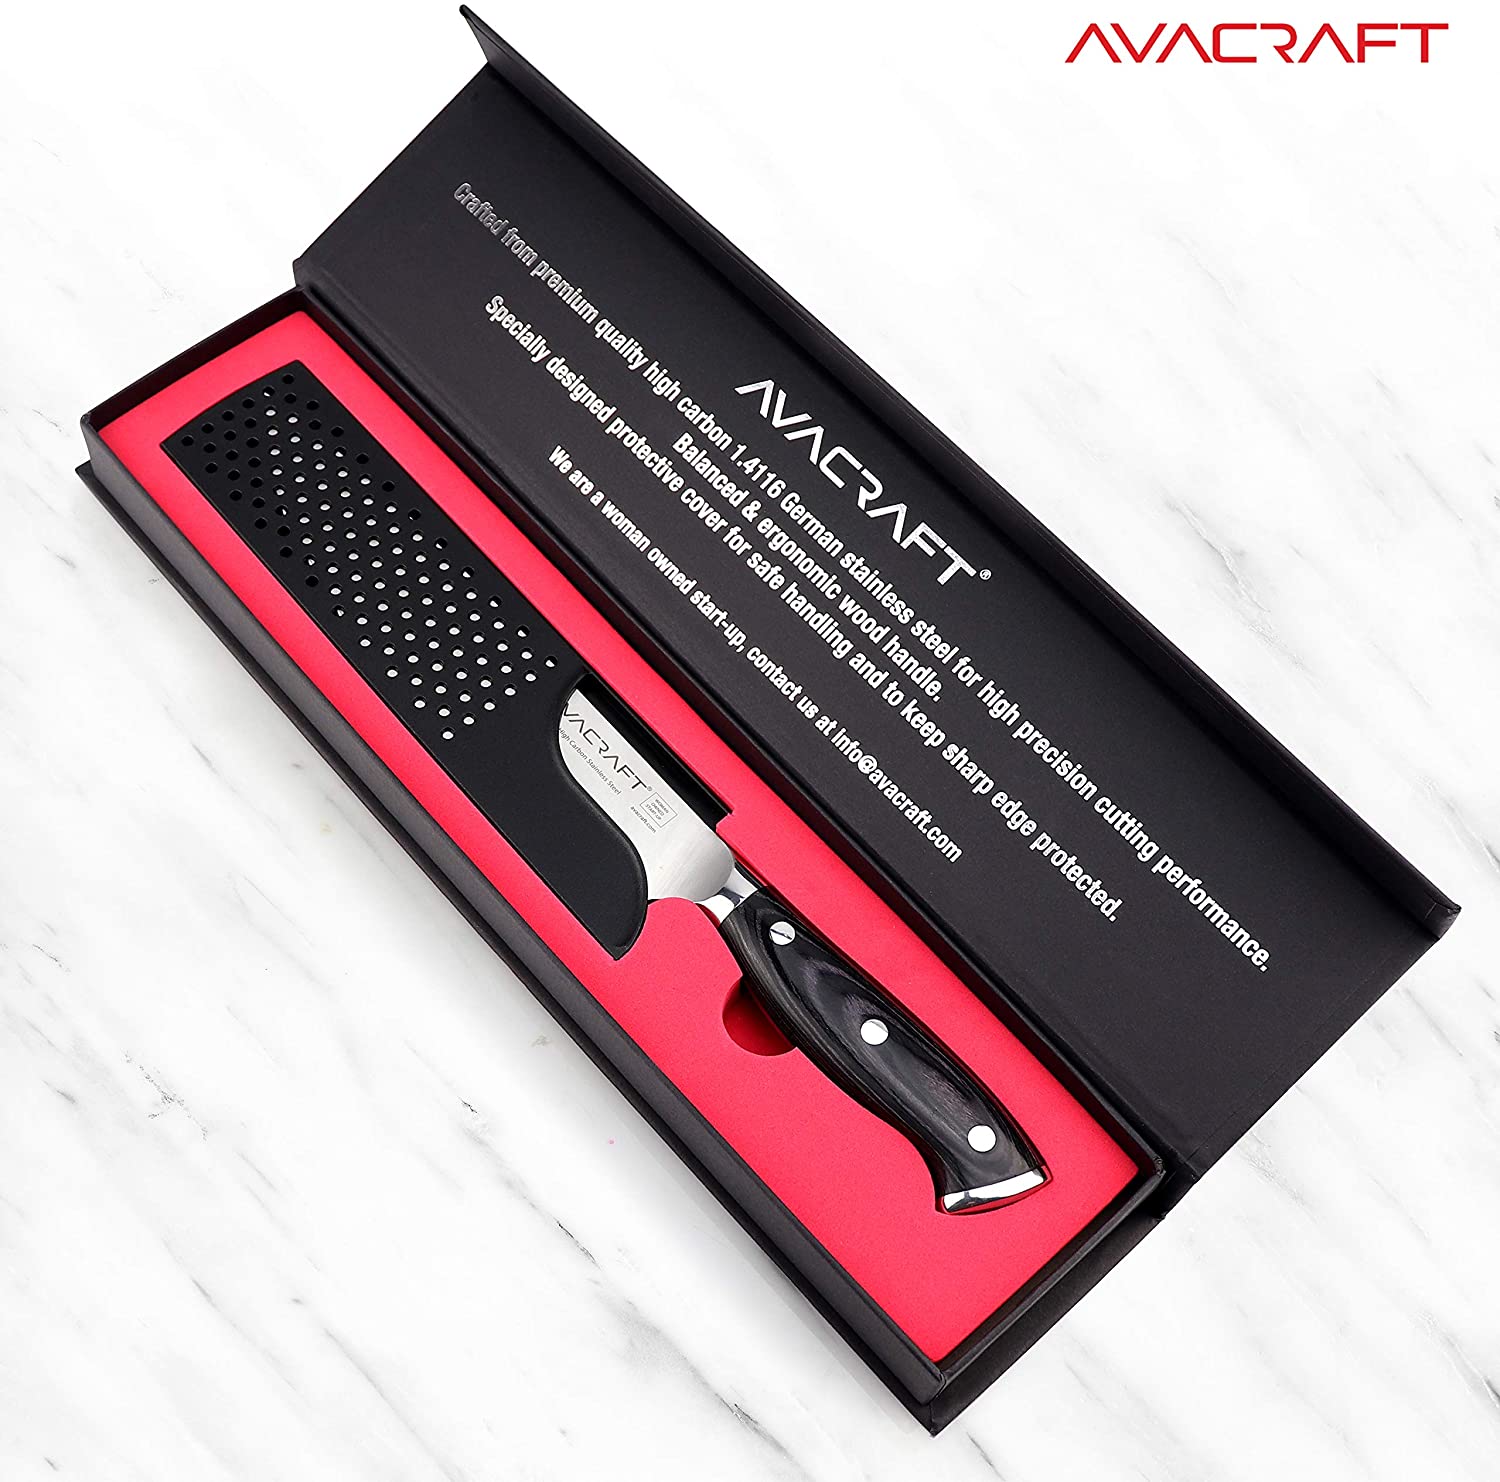 AVACRAFT Chef's Knife, Meat Knife, German 1.4116 High Carbon Stainless Steel, Ergonomic Wooden Handle, Knife with Custom Storage Case (8" Chef's Knife)